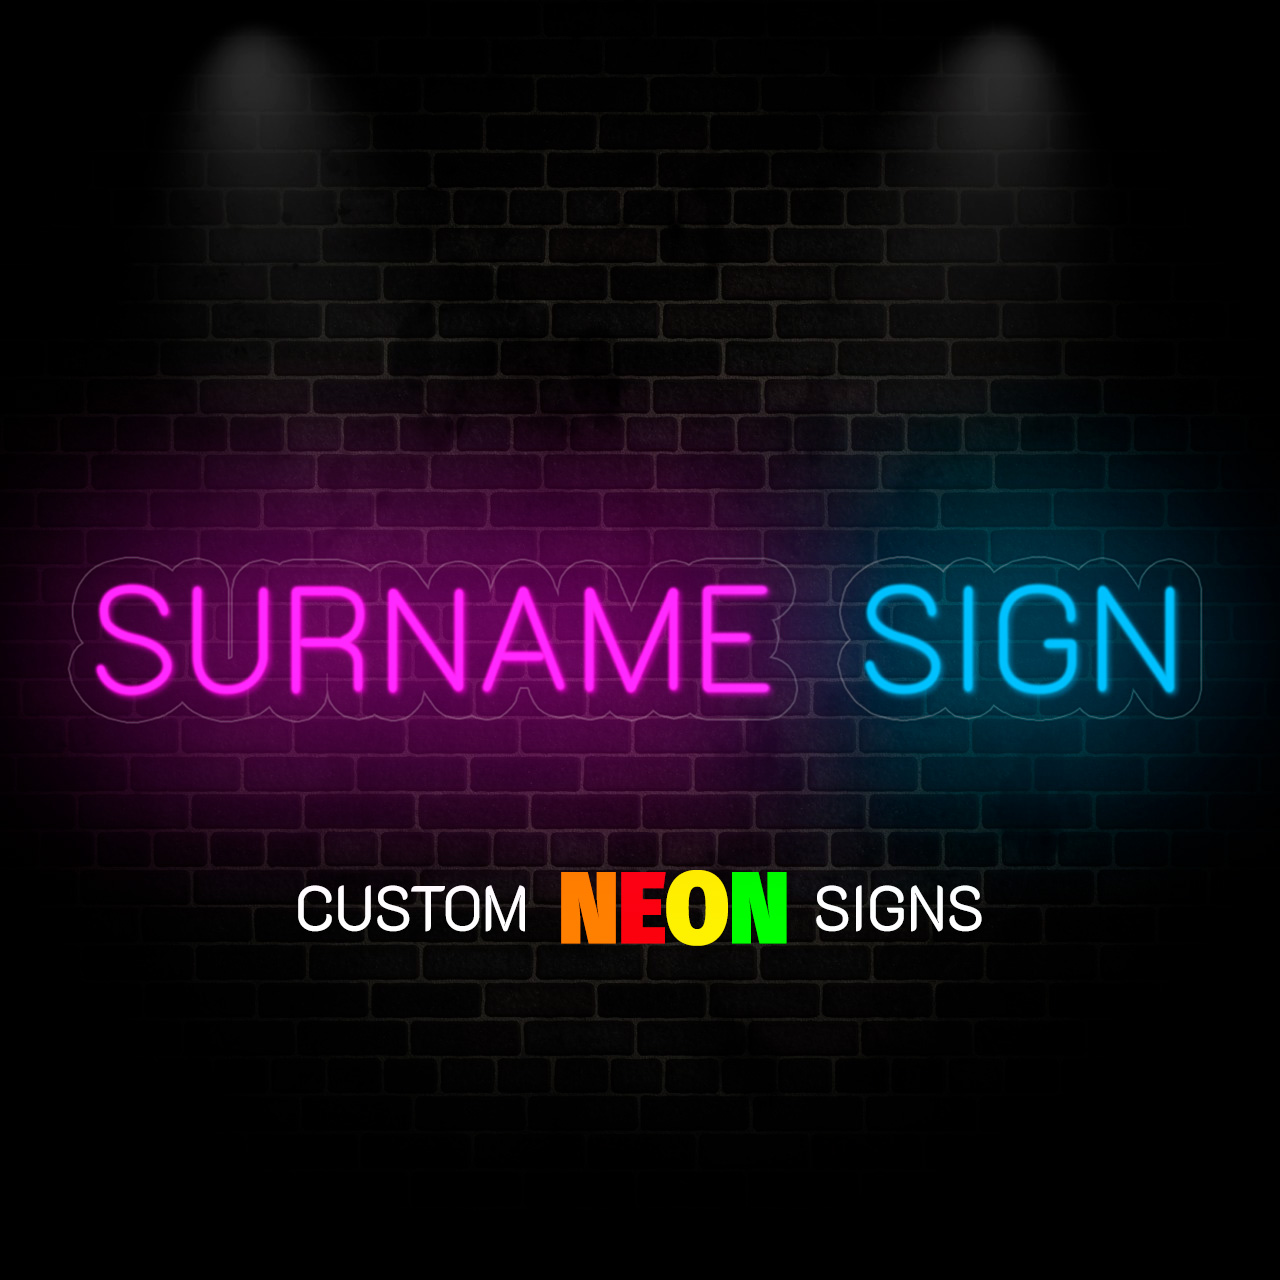 Surname sign Neon Signs